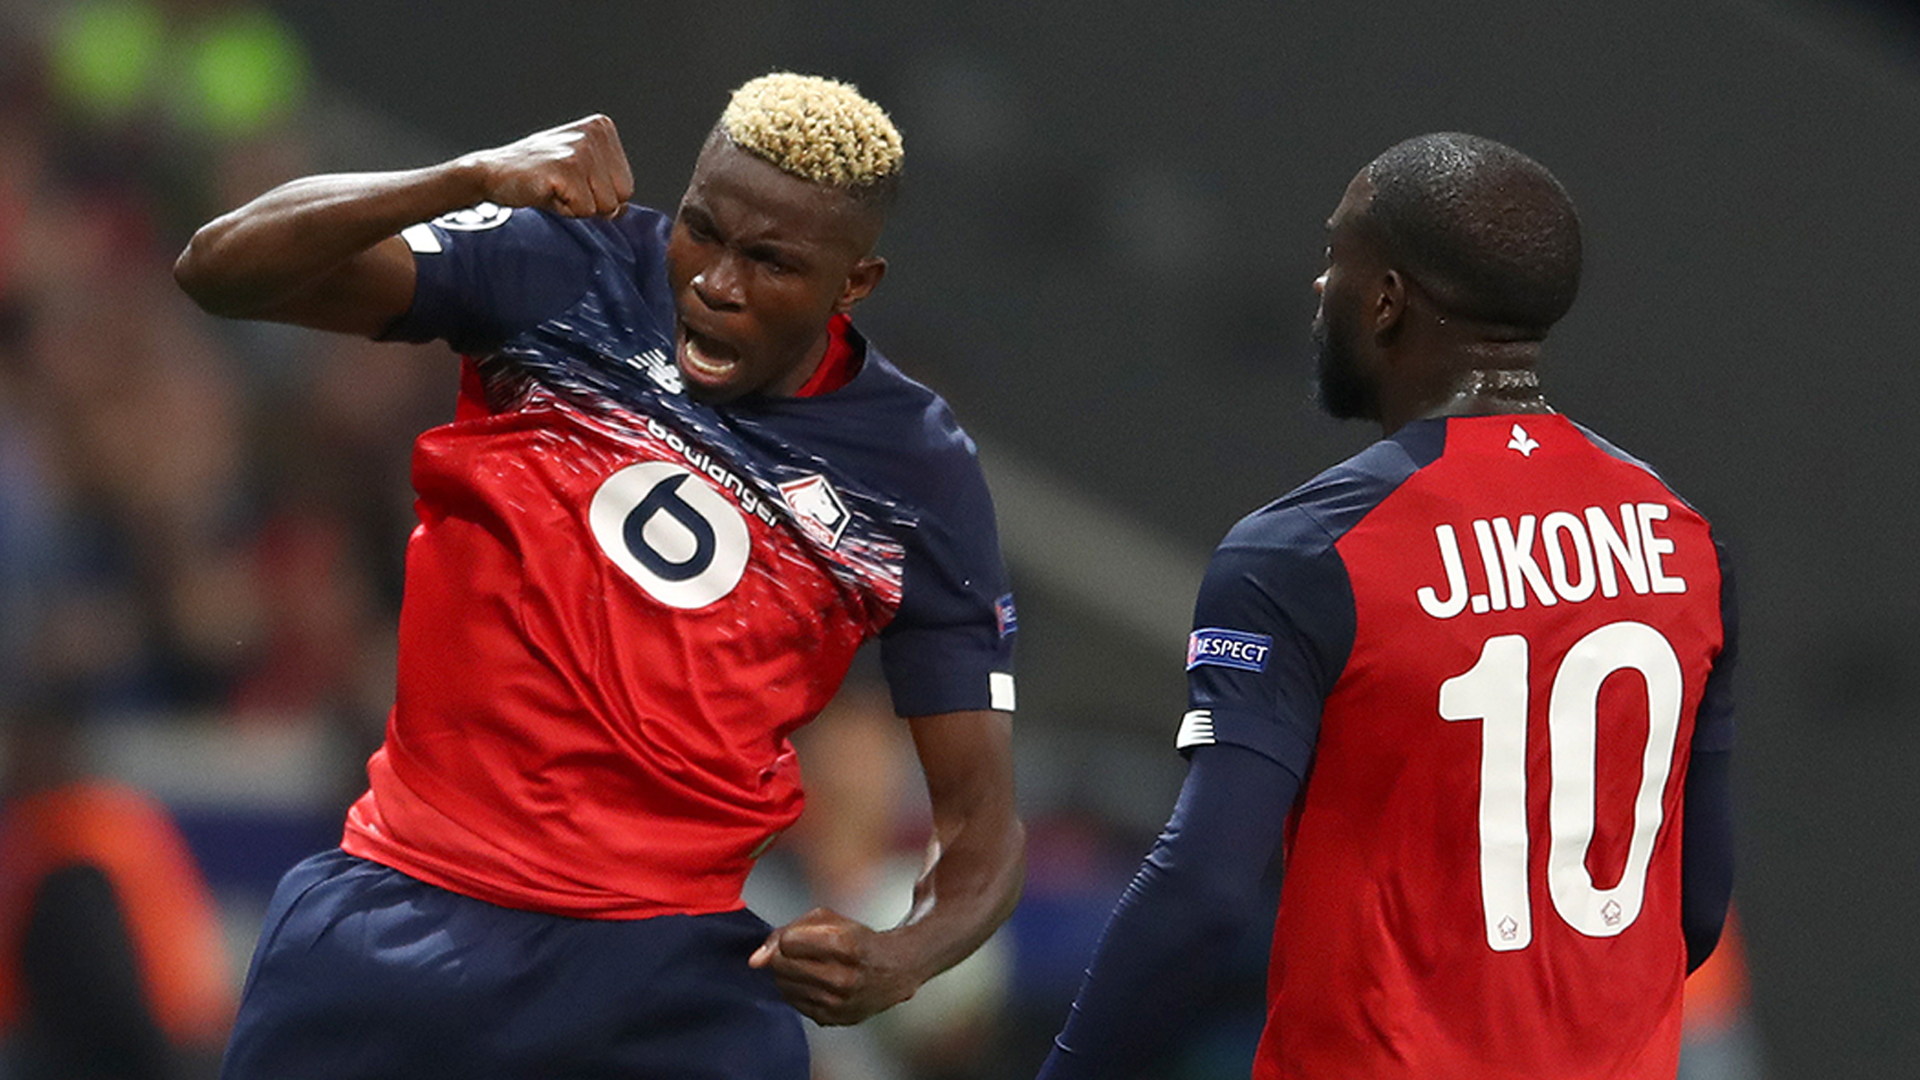 'Osimhen is like Aubameyang and obsessed with goals like Cavani' - Lille coach Galtier